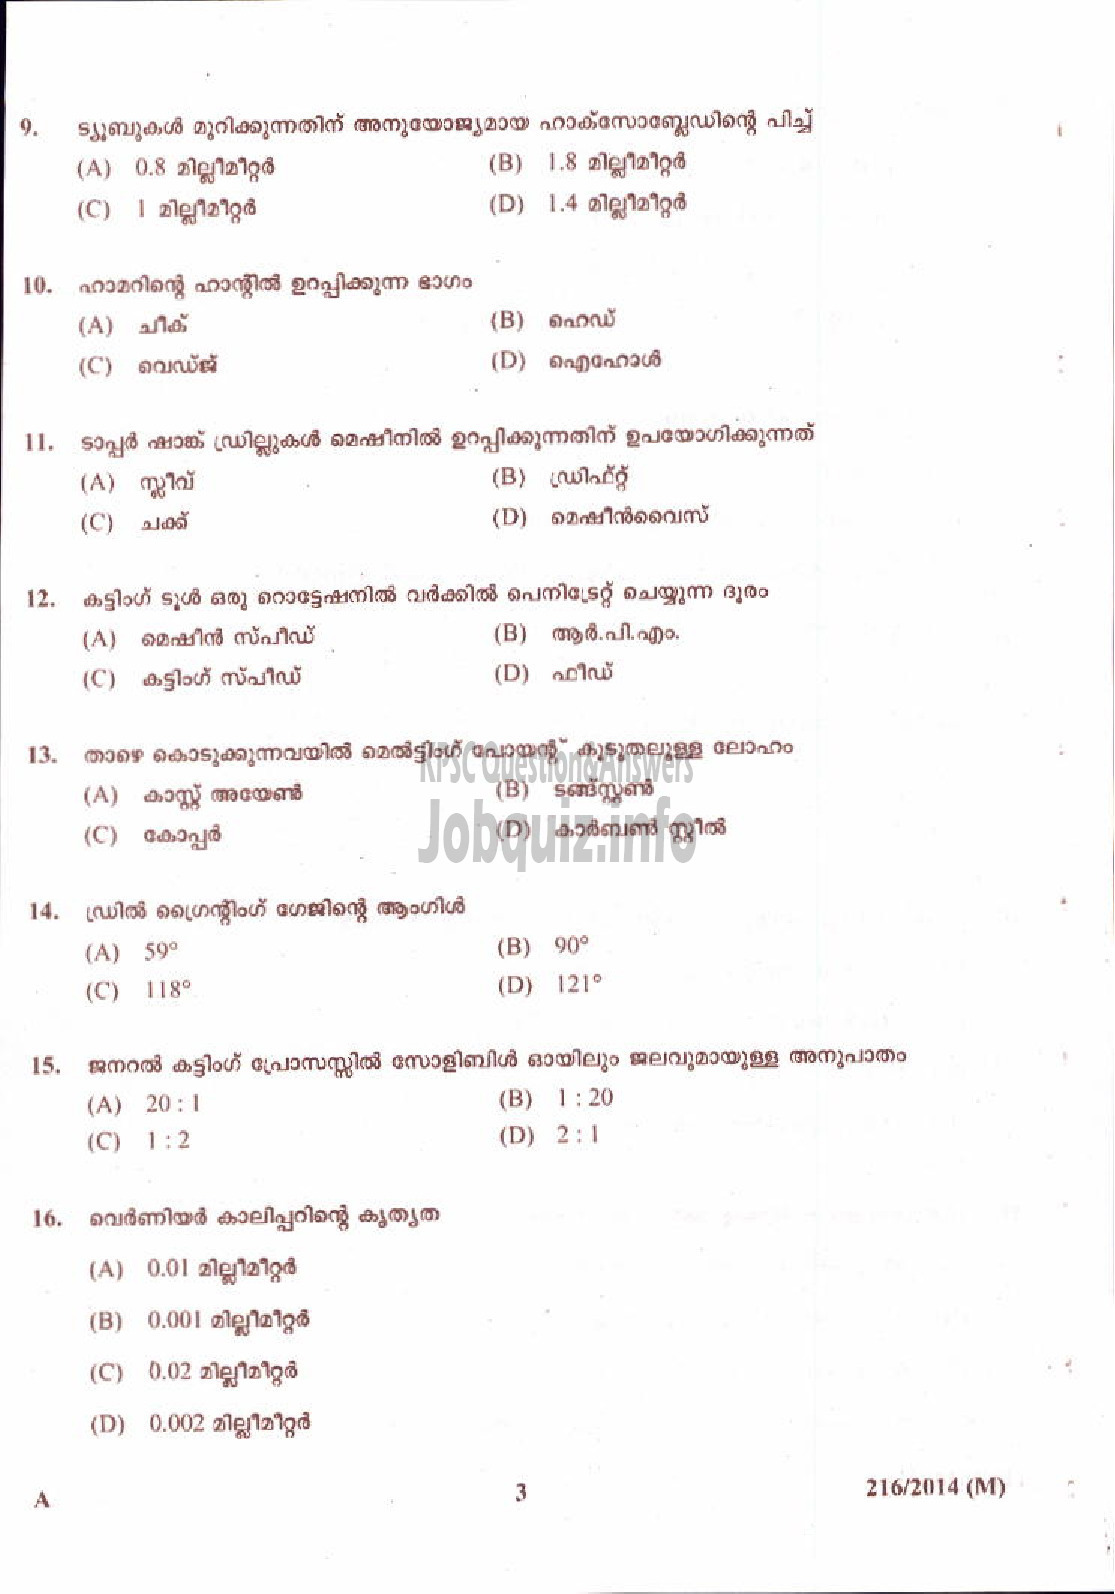 Kerala PSC Question Paper - FITTER AGRICULTURE-3